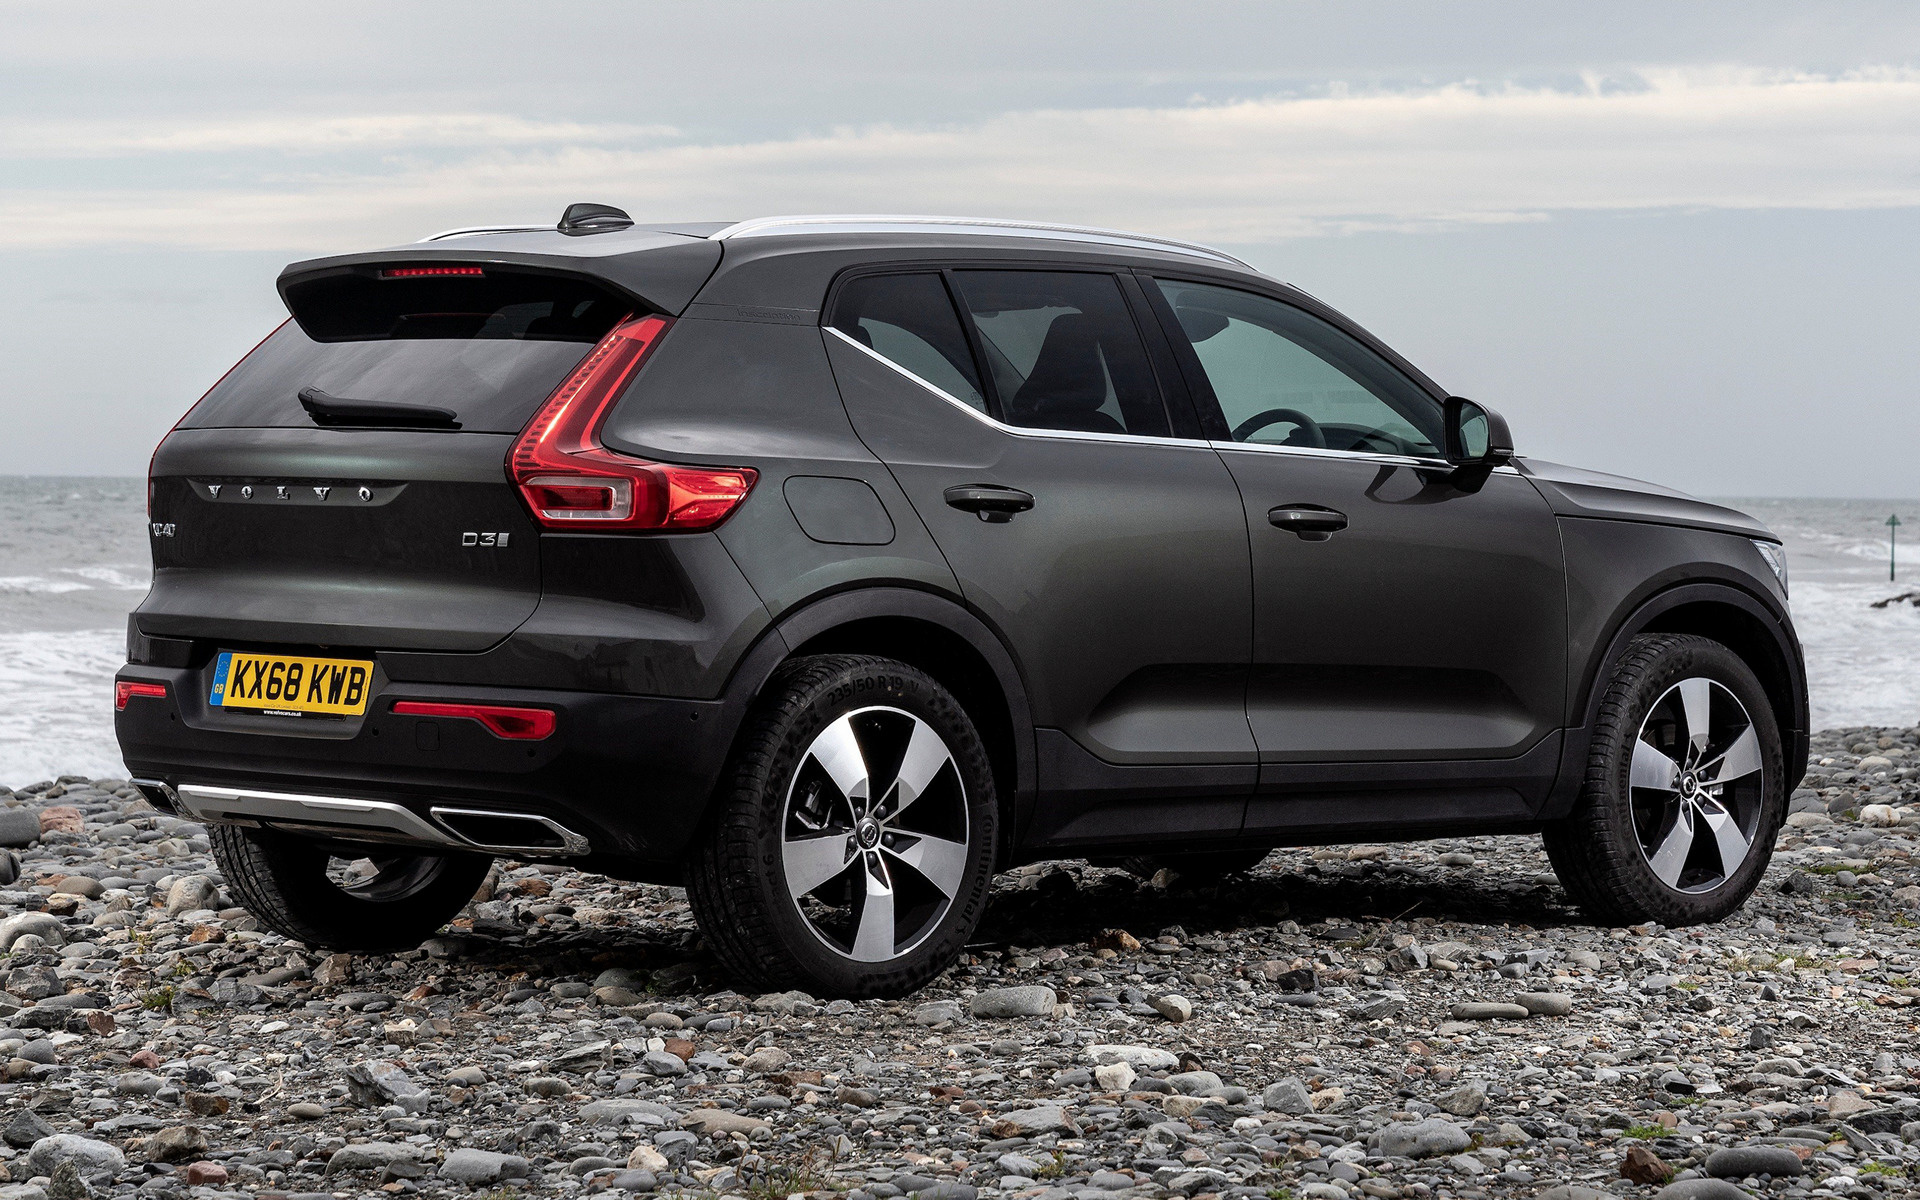 2018 Volvo XC40 Inscription (UK) Wallpapers and HD